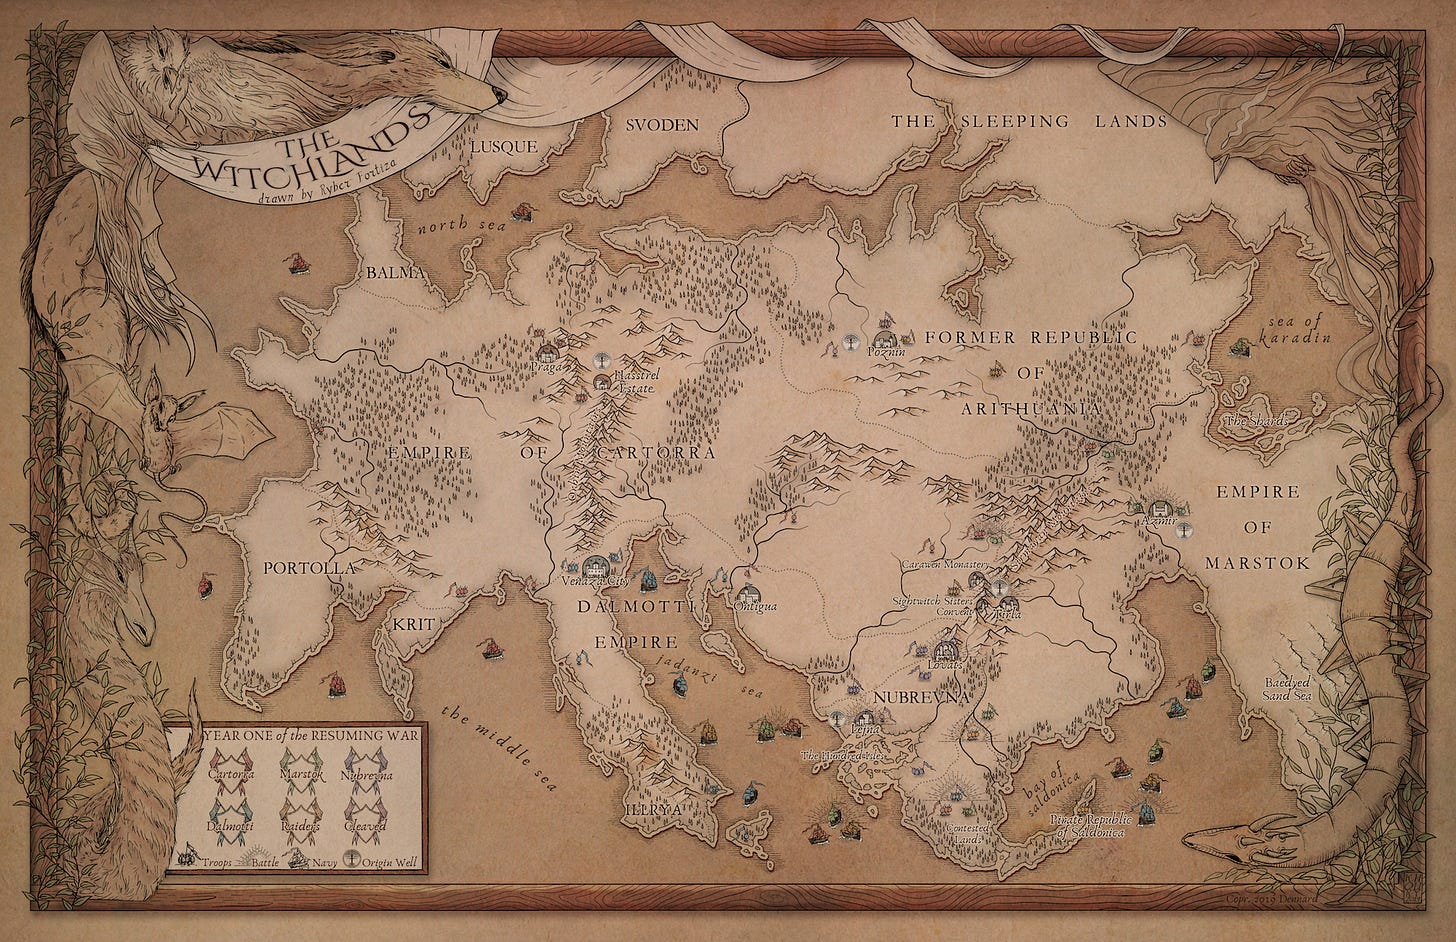 A detailed map of the Witchlands, including locations of troops and battles